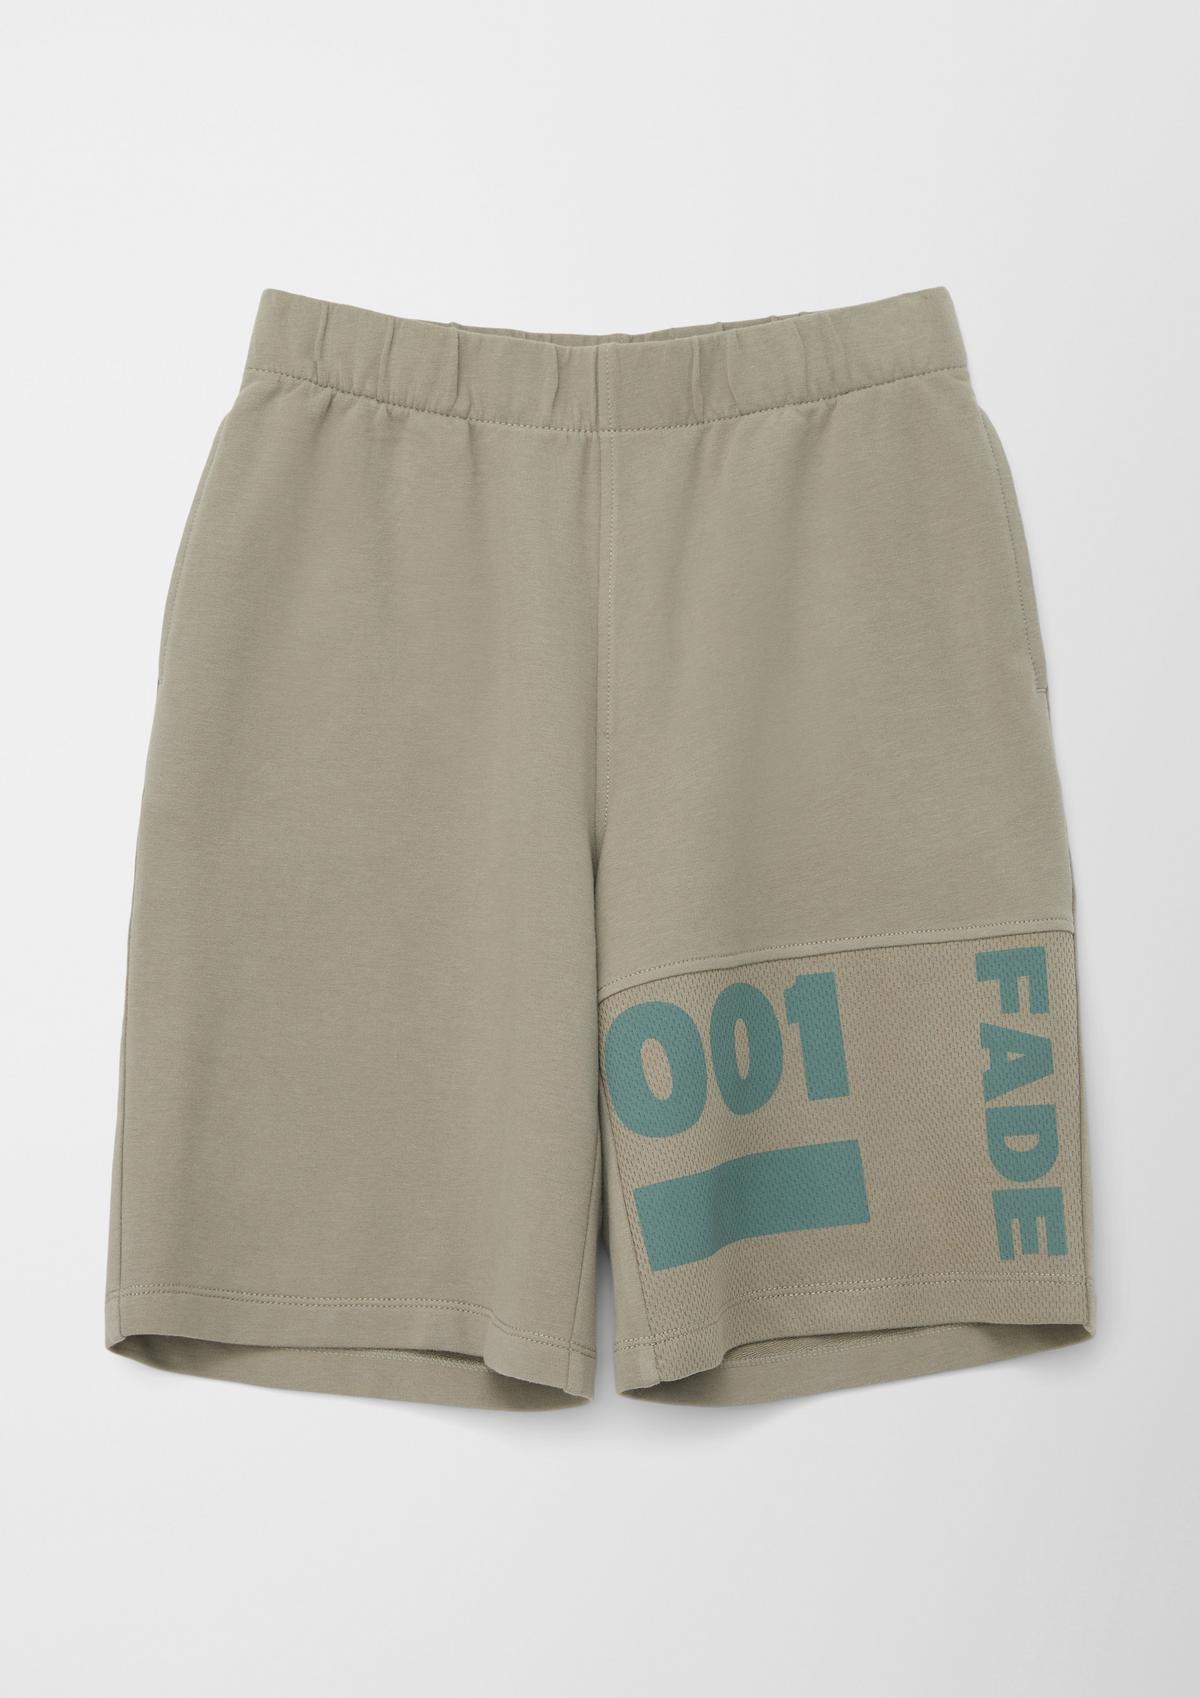 for Bermuda shorts boys online Find and teens